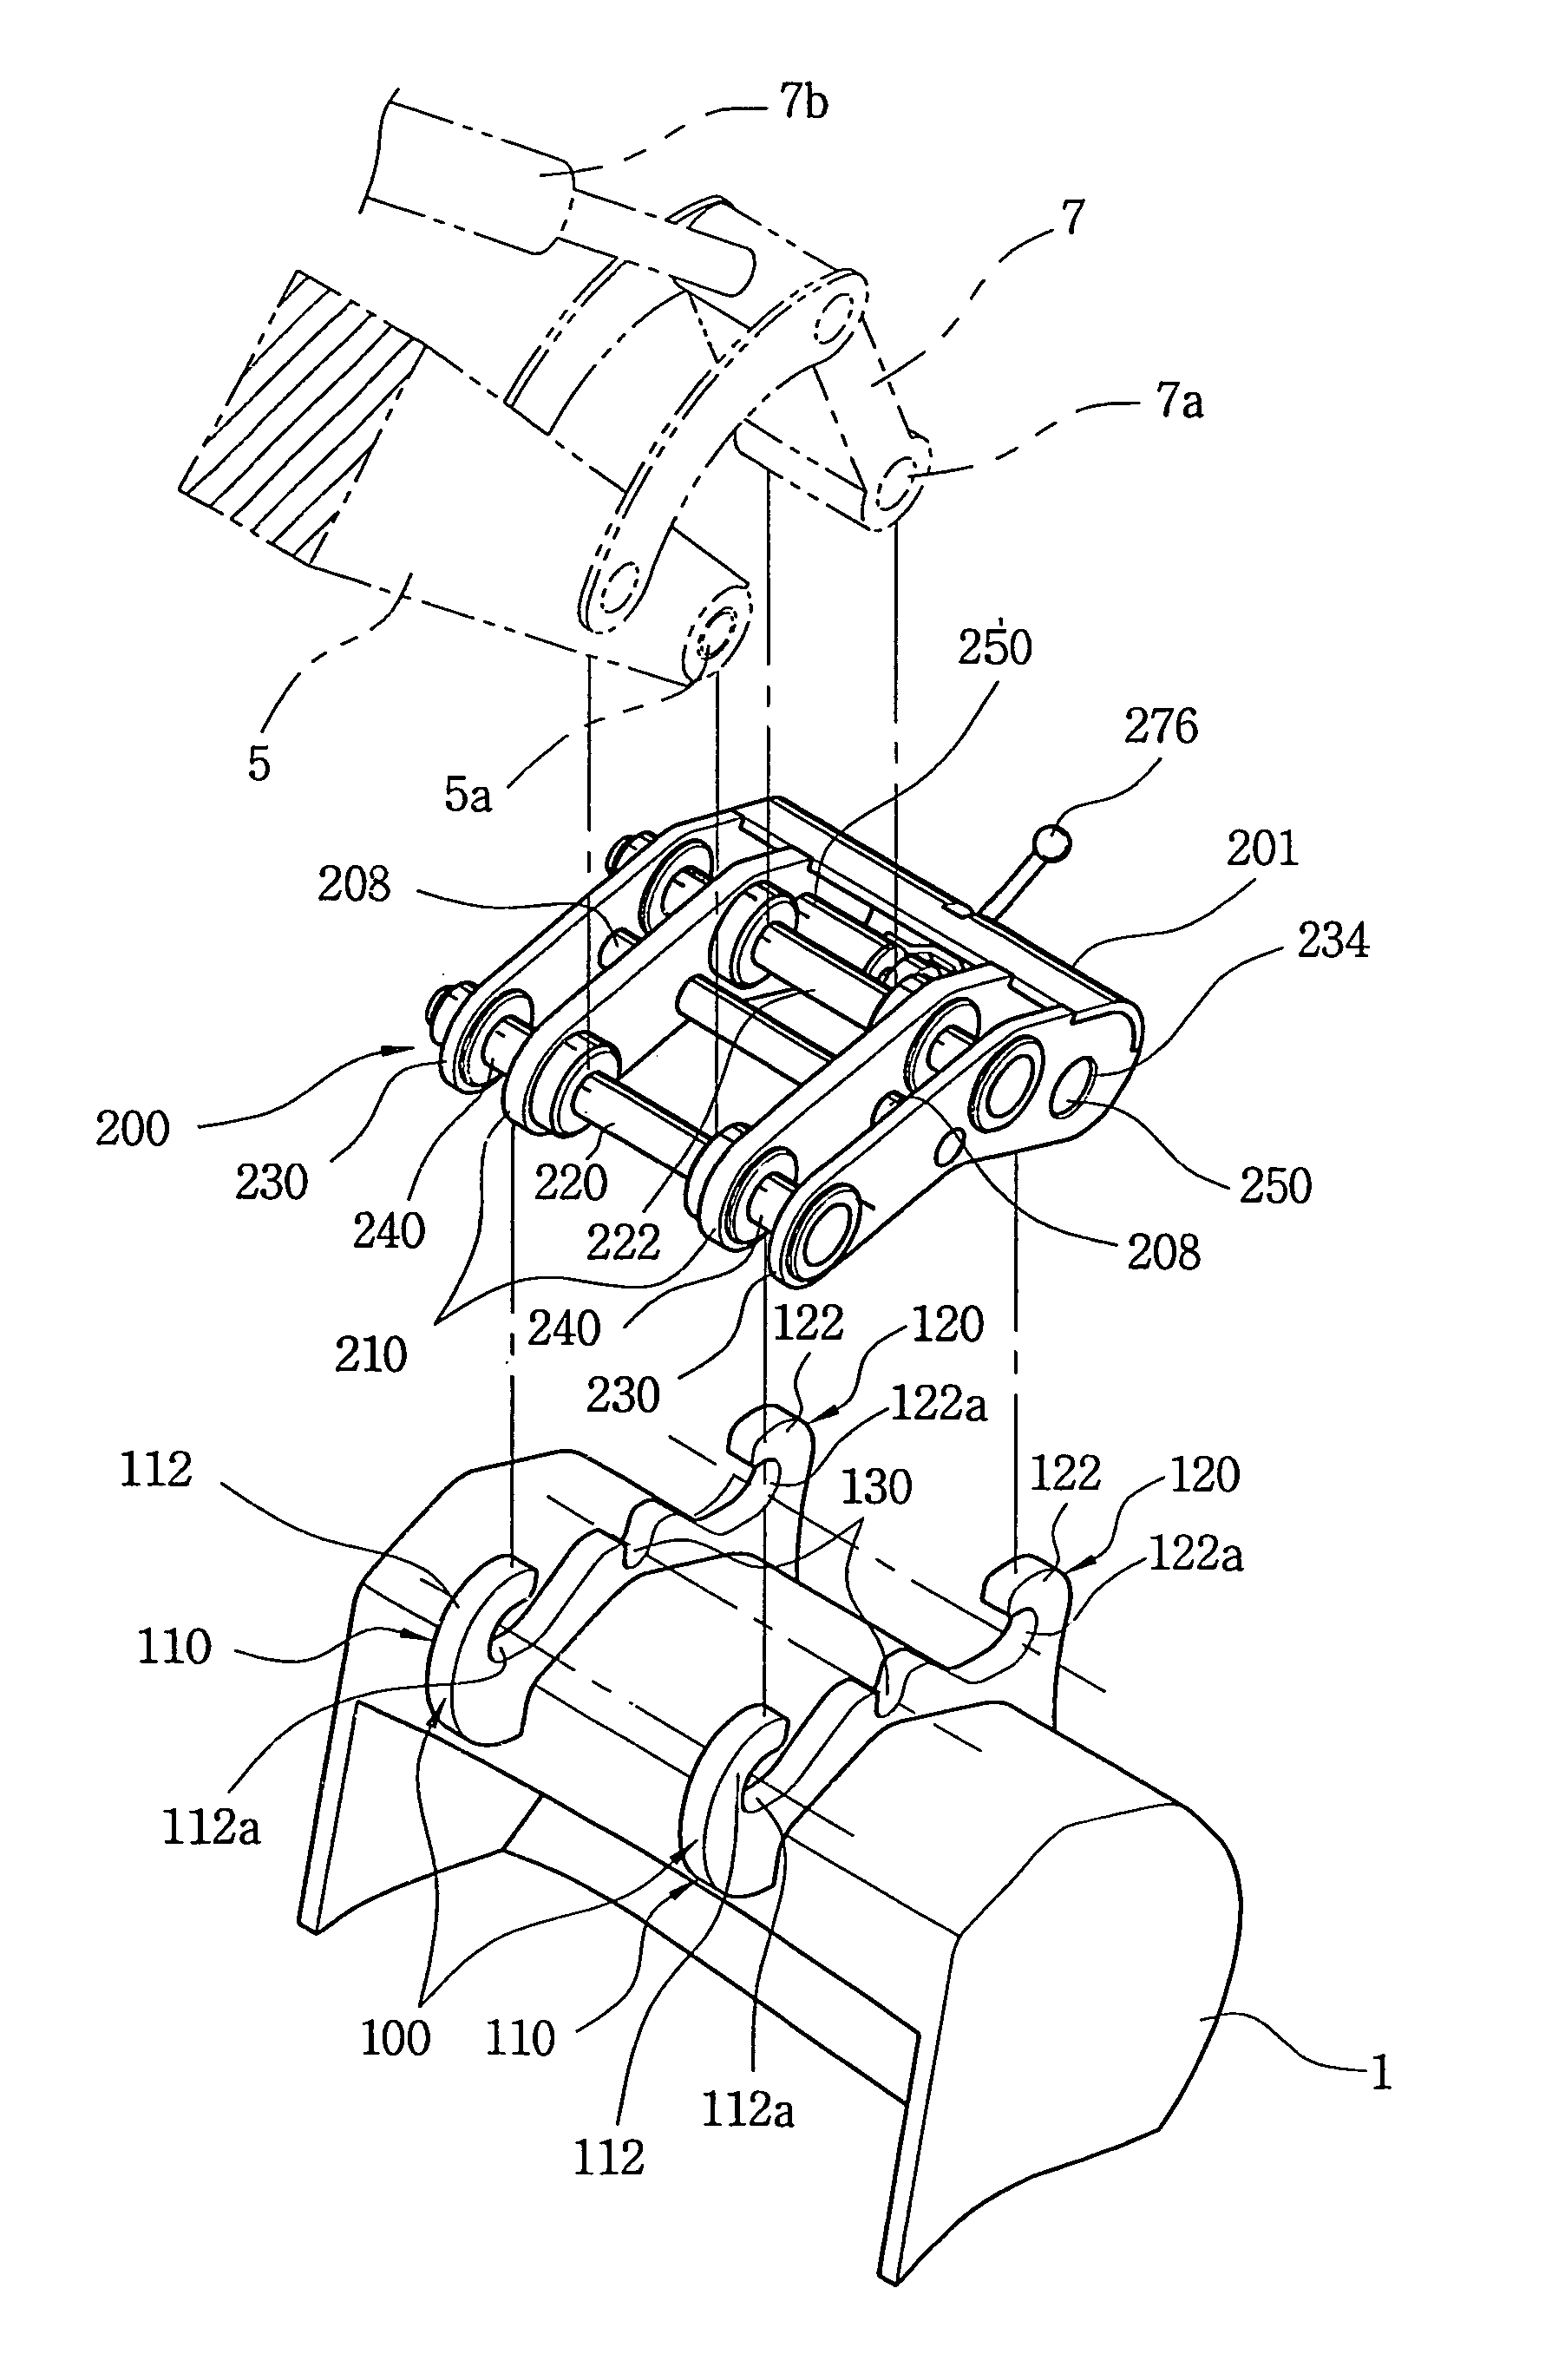 Attachment coupling device for heavy machinery